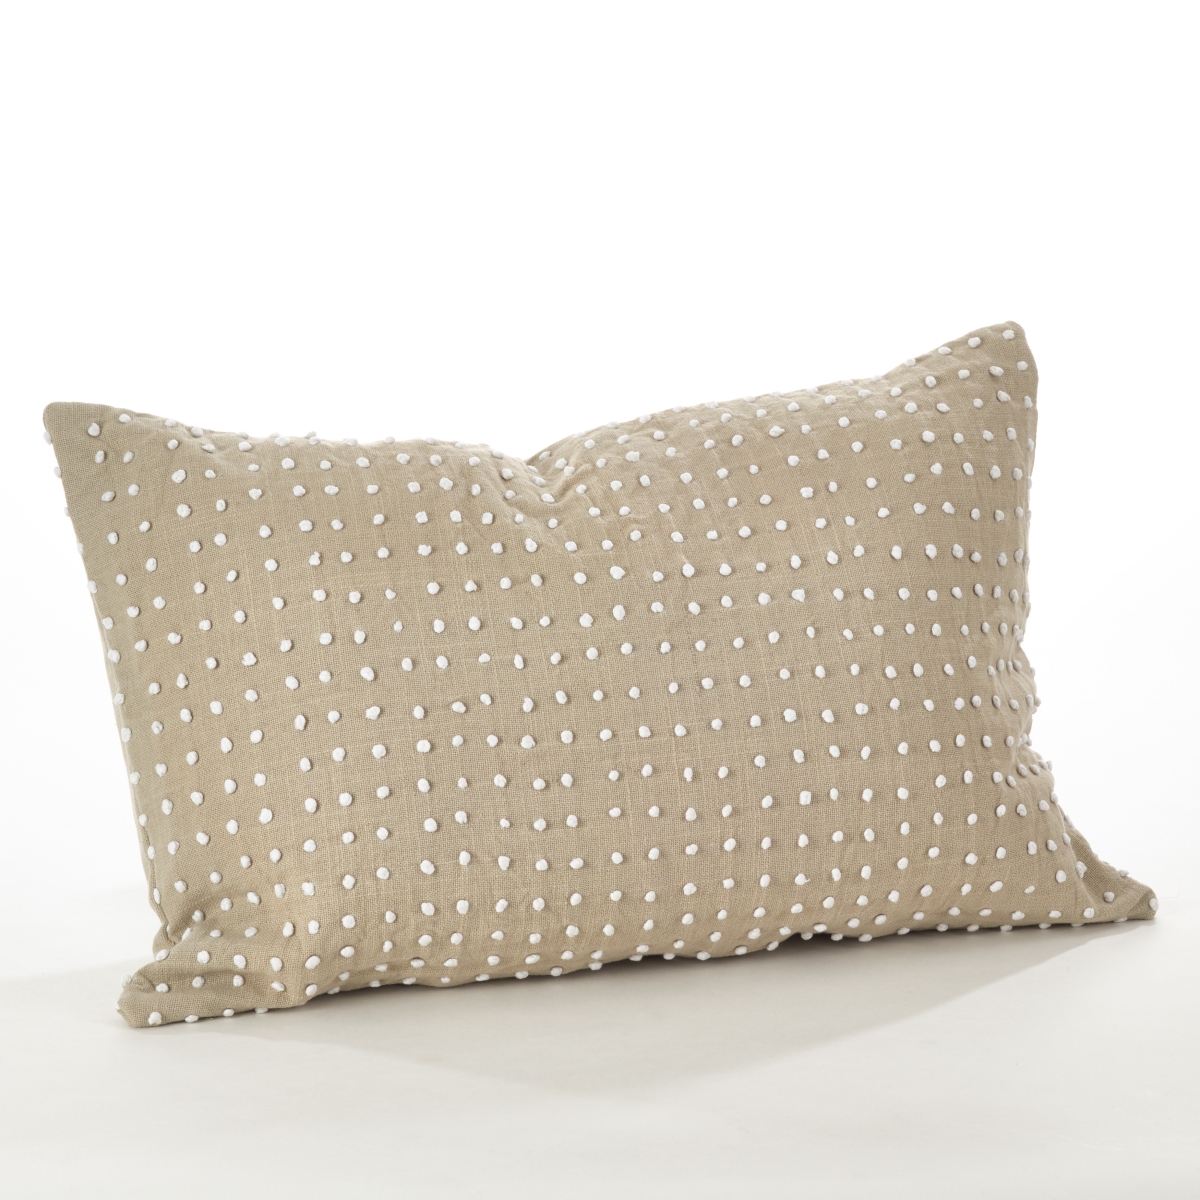 0006.n1423b 14 X 23 In. French Knot Design Down Filled Cotton Throw Pillow, Natural